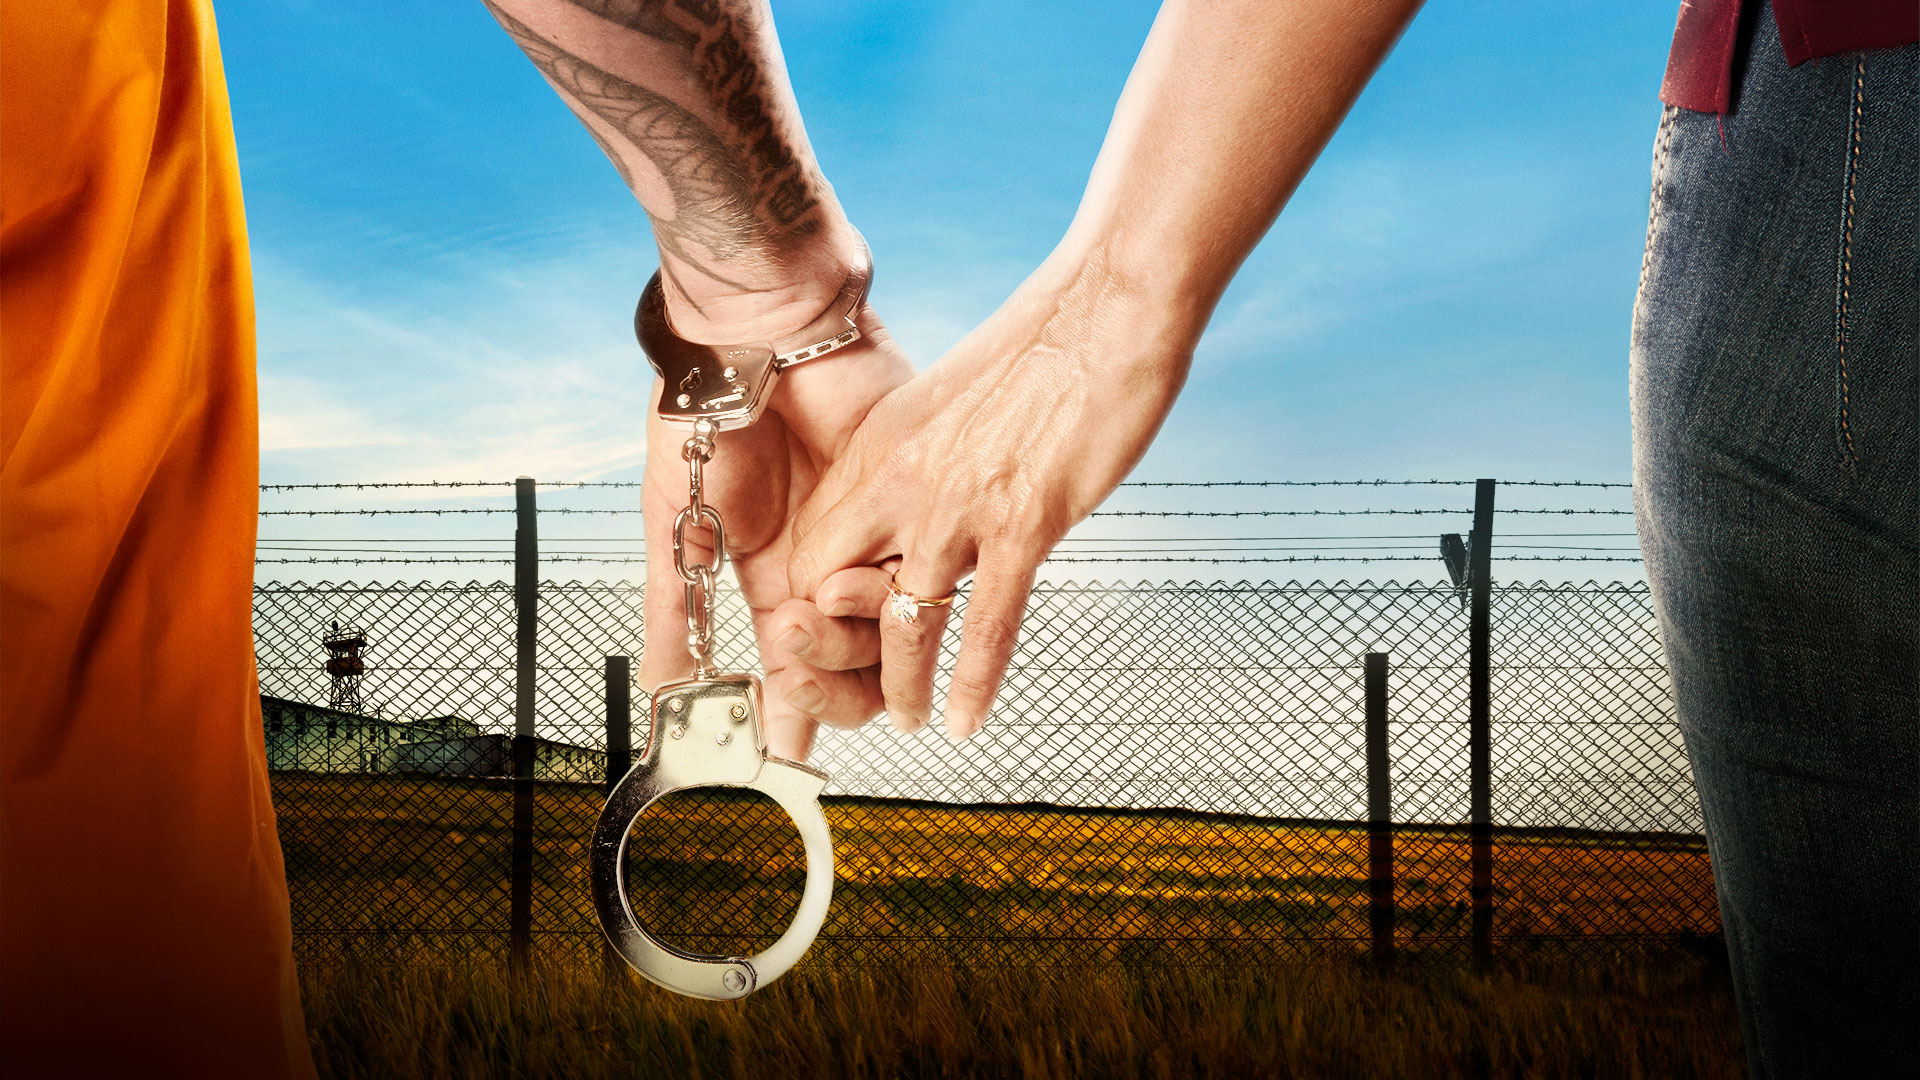 Watch Love After Lockup Online | Stream New Full Episodes | WE tv.